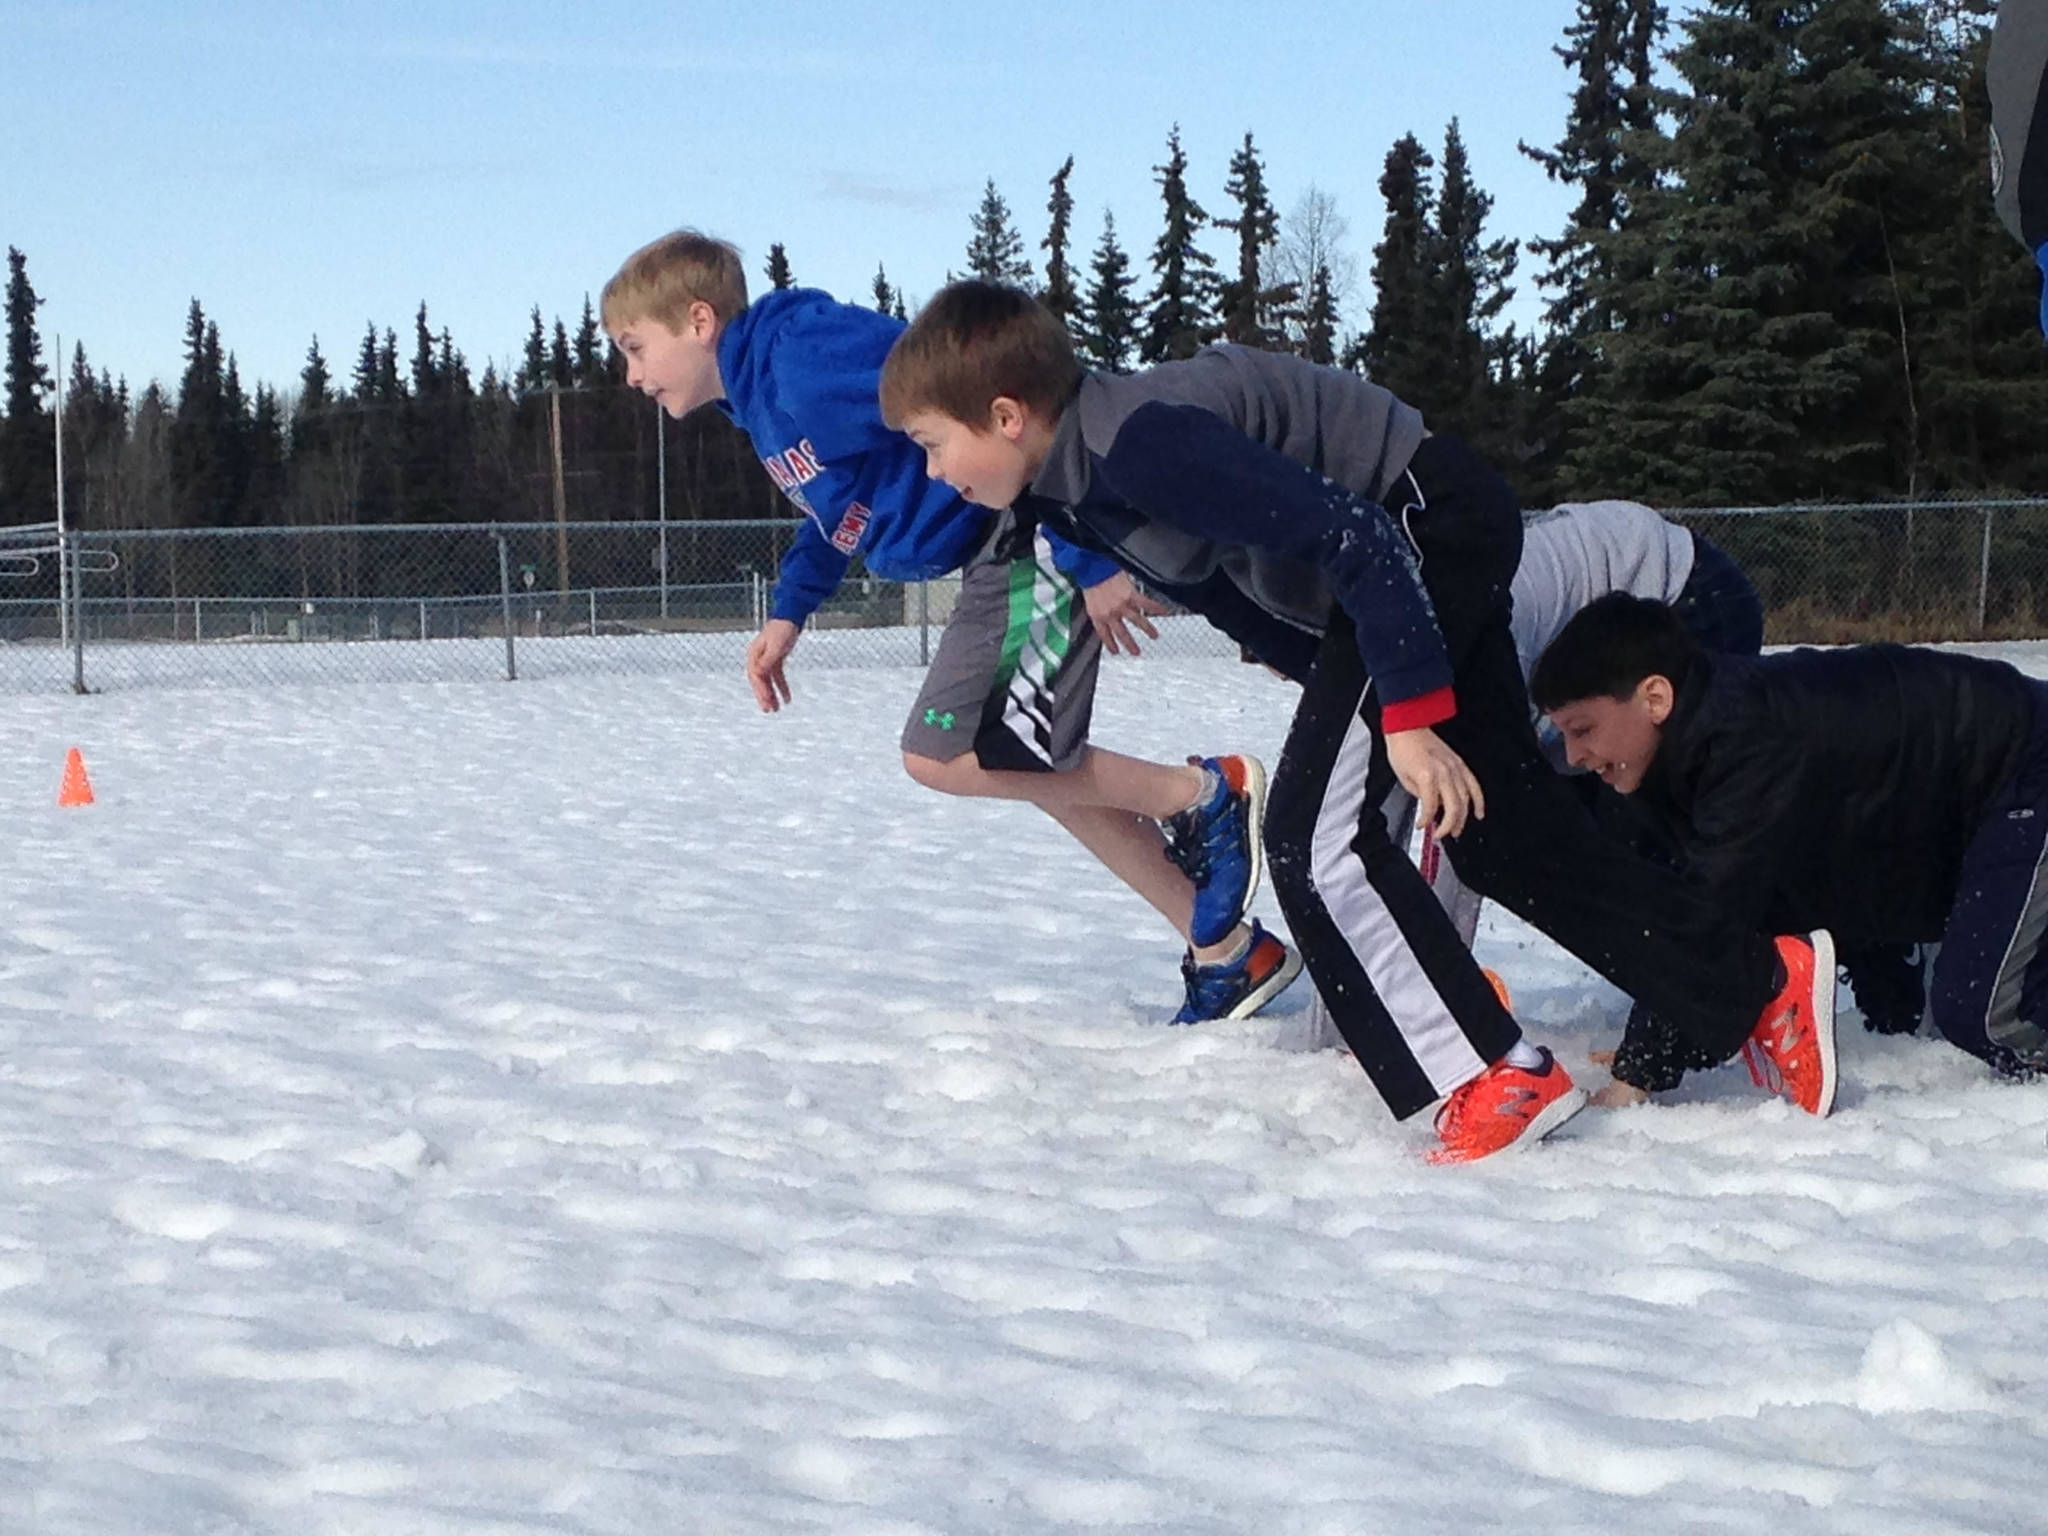 TOP: Kenai Middle School seventh graders Ben Boersma, Ky Calvert and Daniel Shelden participate in the FROST obstacle course. ABOVE: Kenai Middle School students ready to attend the awards banquet.